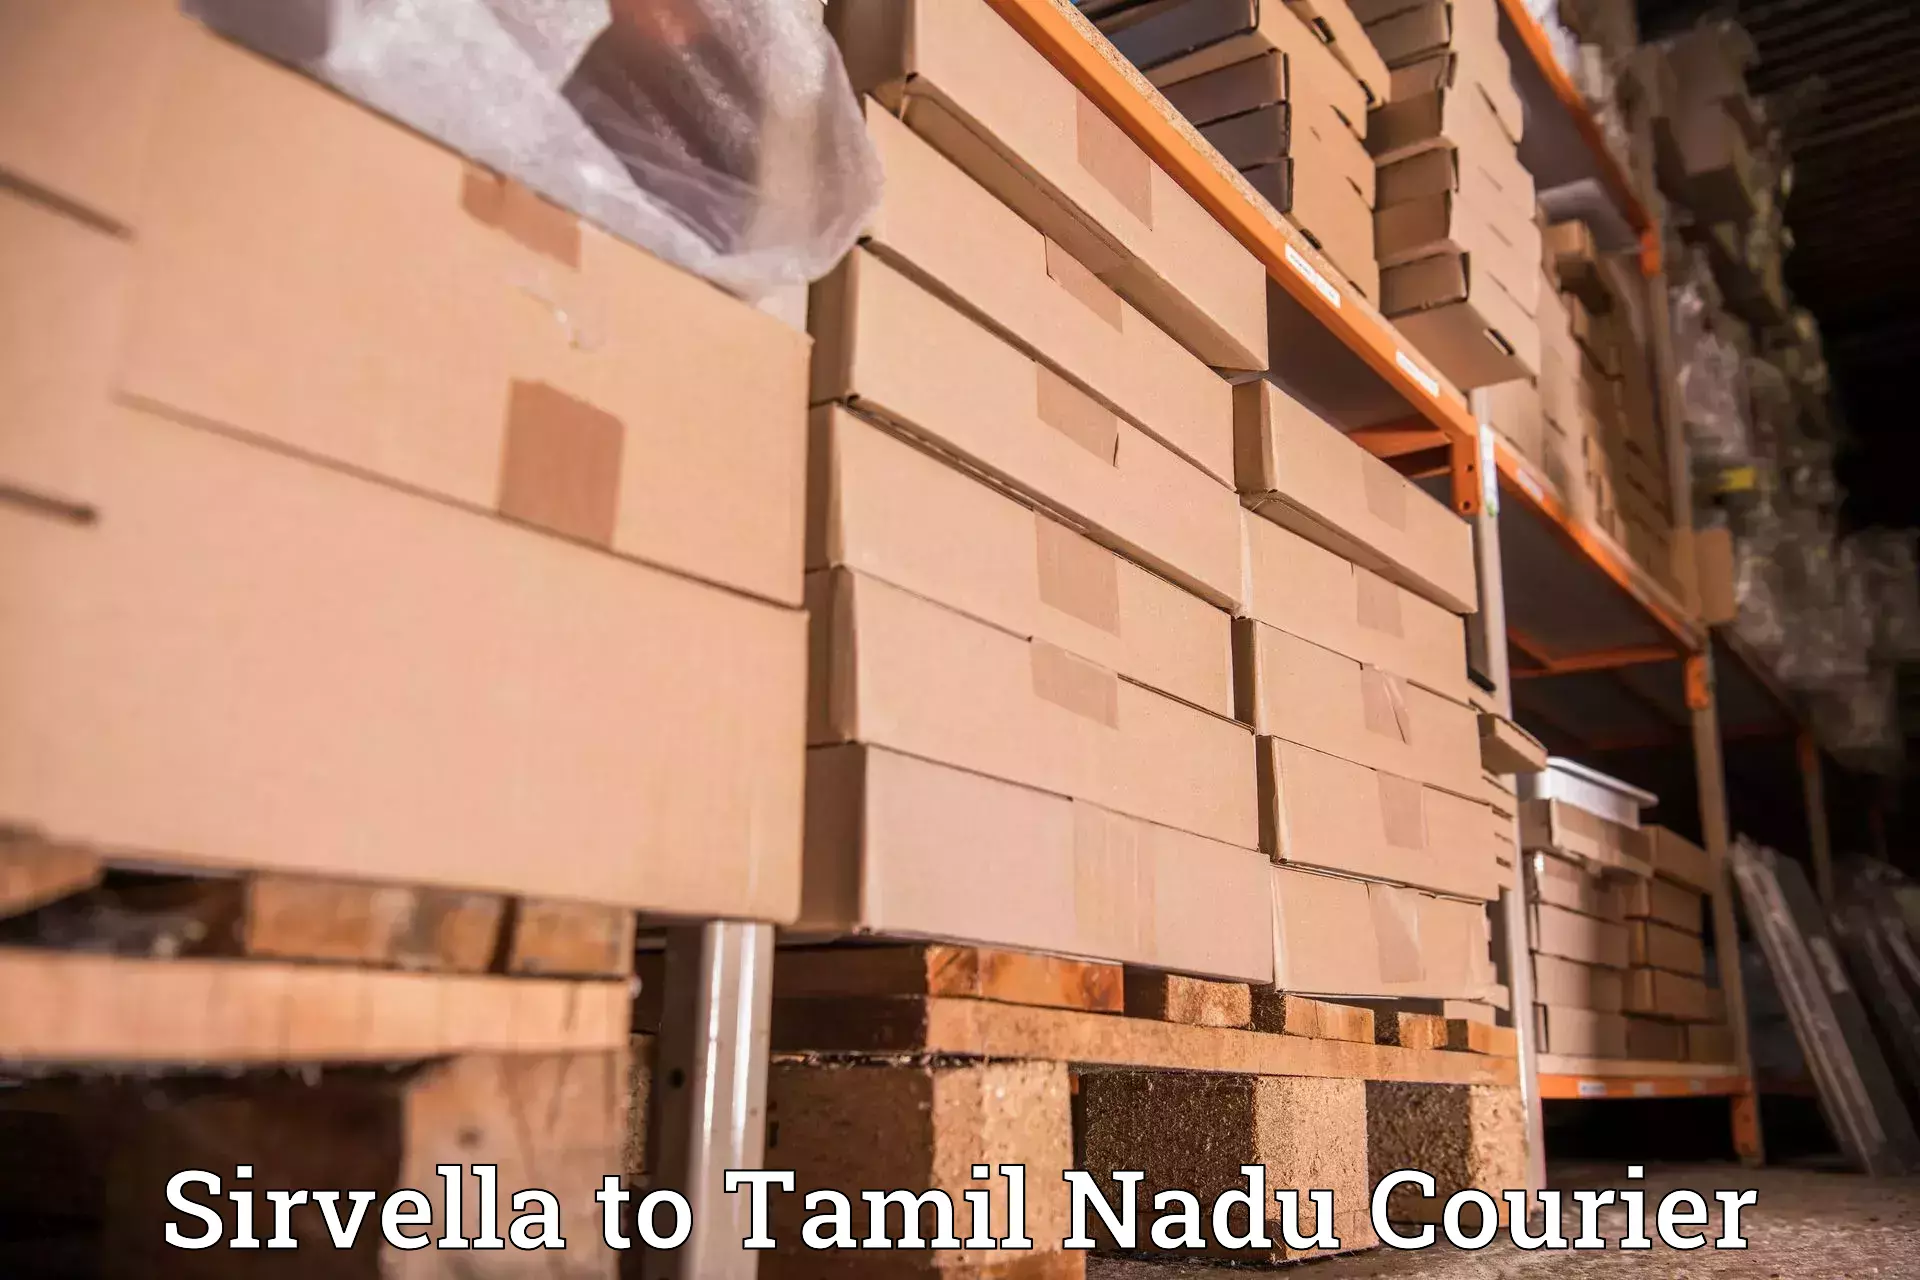 Multi-national courier services Sirvella to Mettala